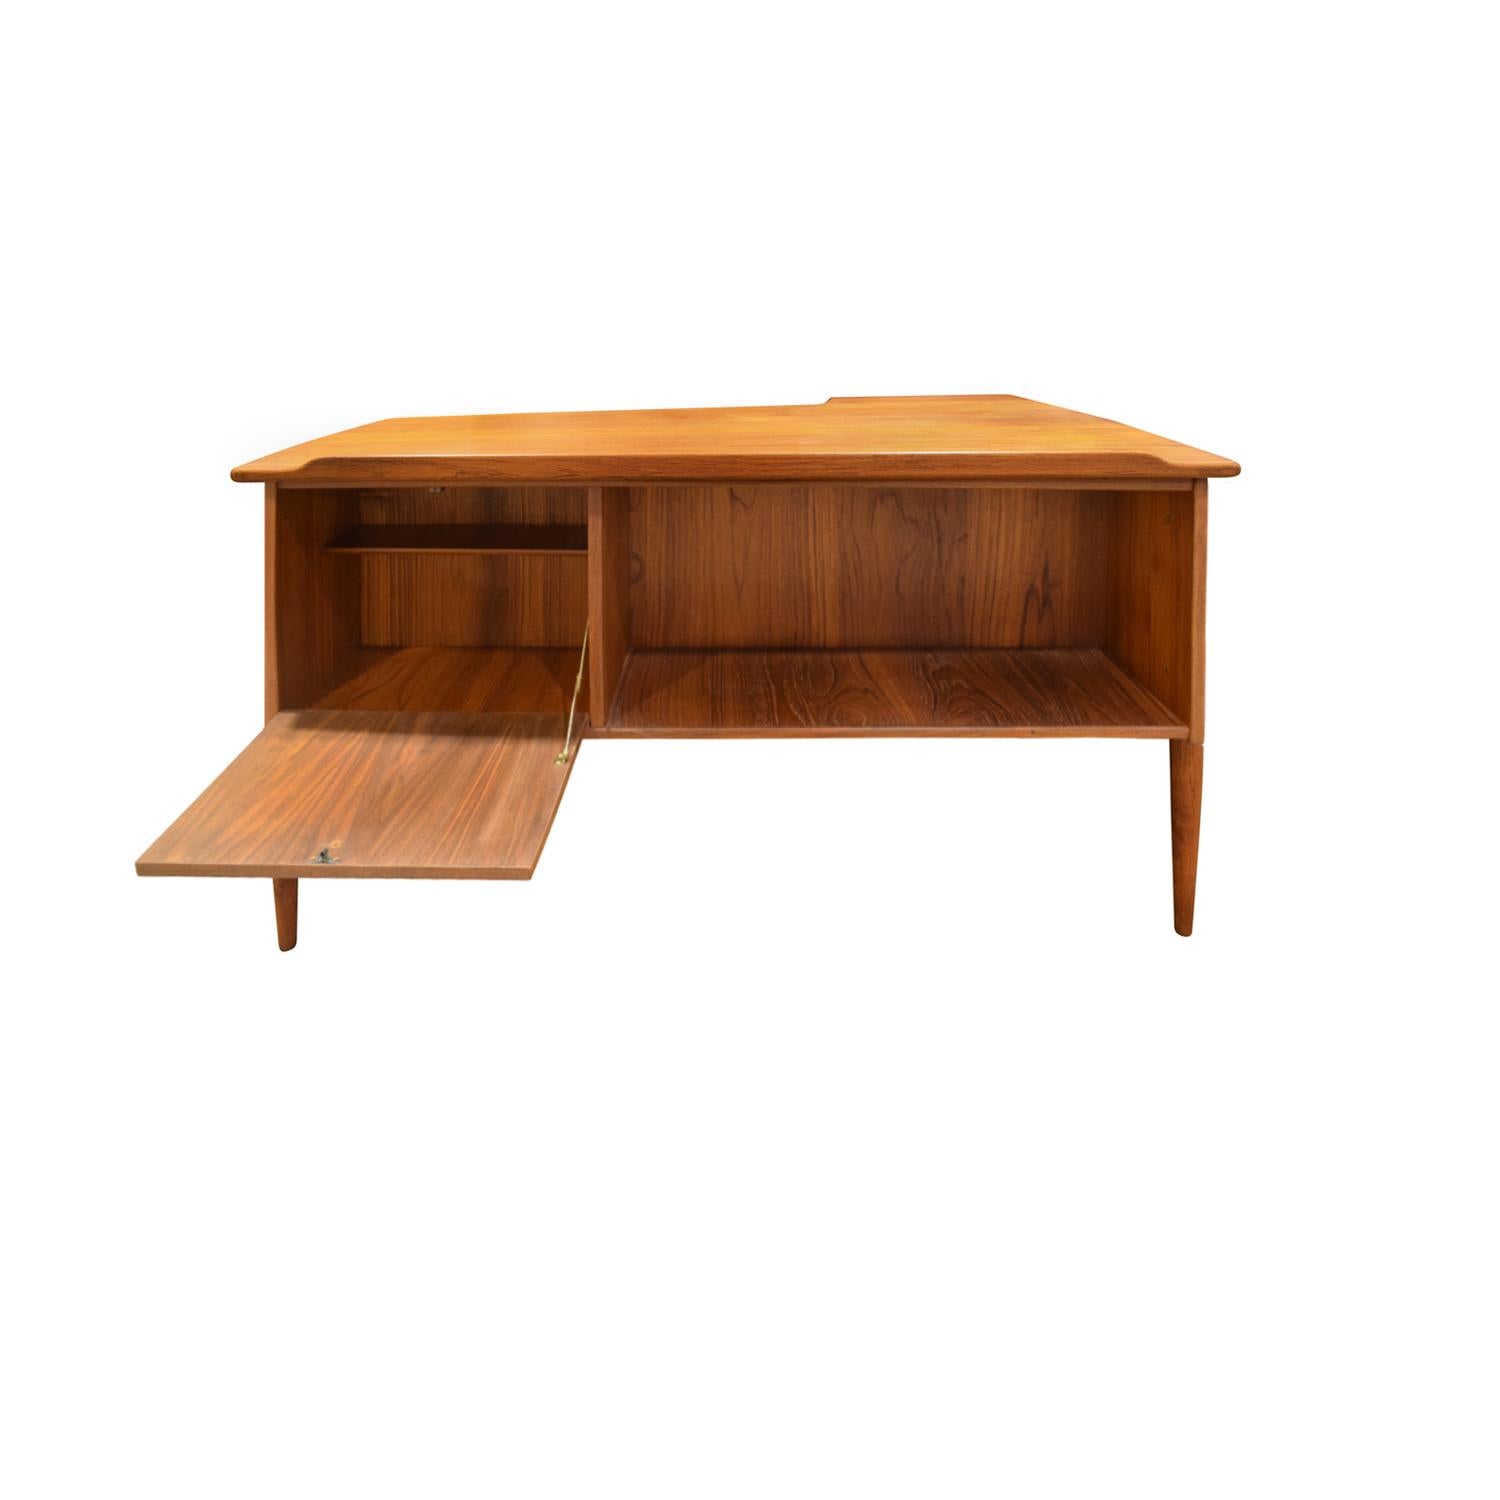 Mid-20th Century Beautifully Crafted Swedish Desk in Teak, 1960s For Sale